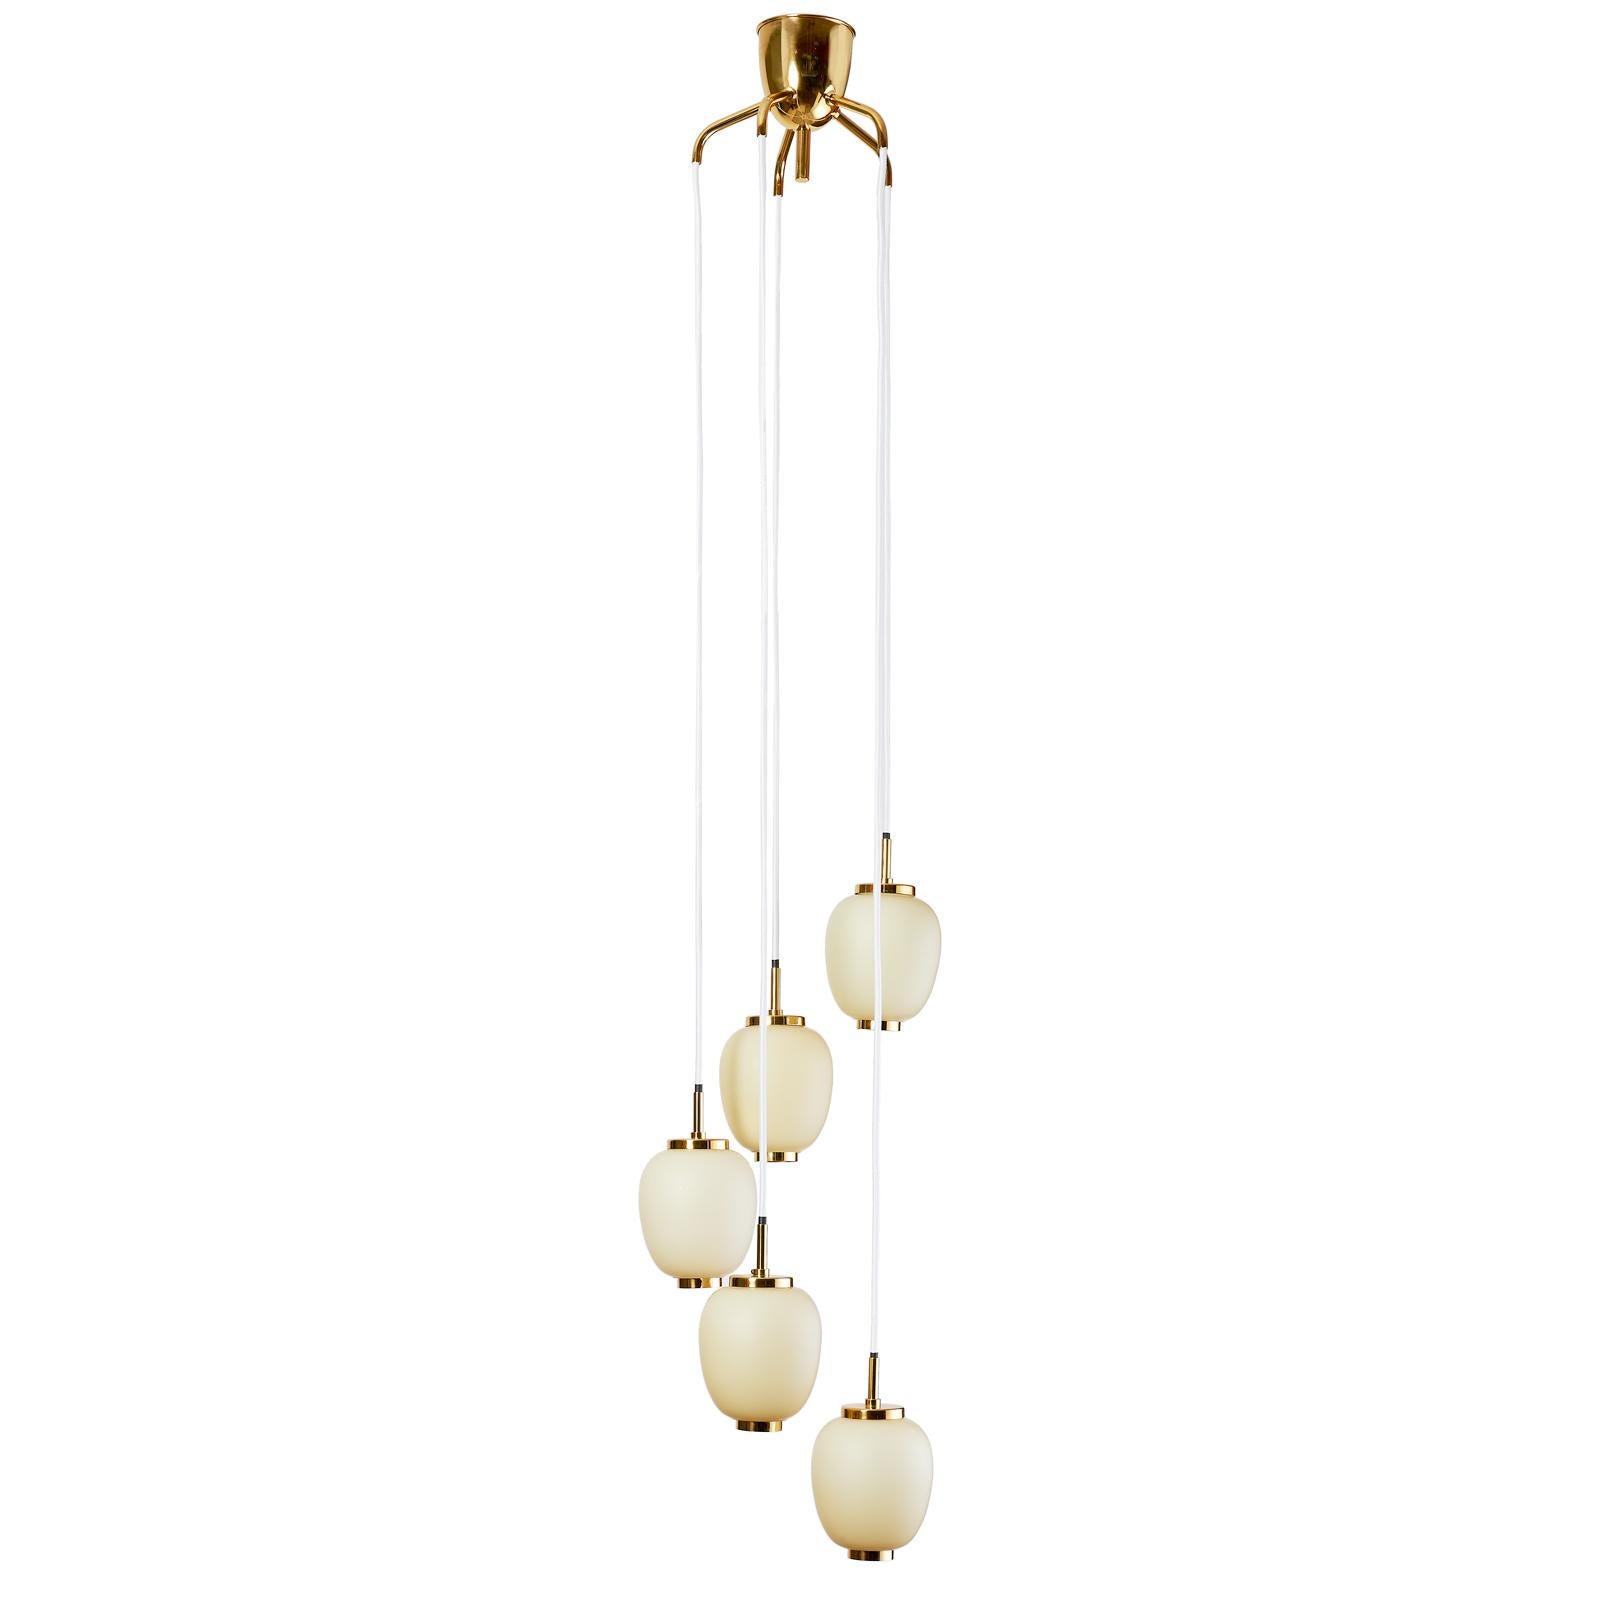 Mid-20th Century Danish Chandelier with Five Oval Glass Shades, 1960s